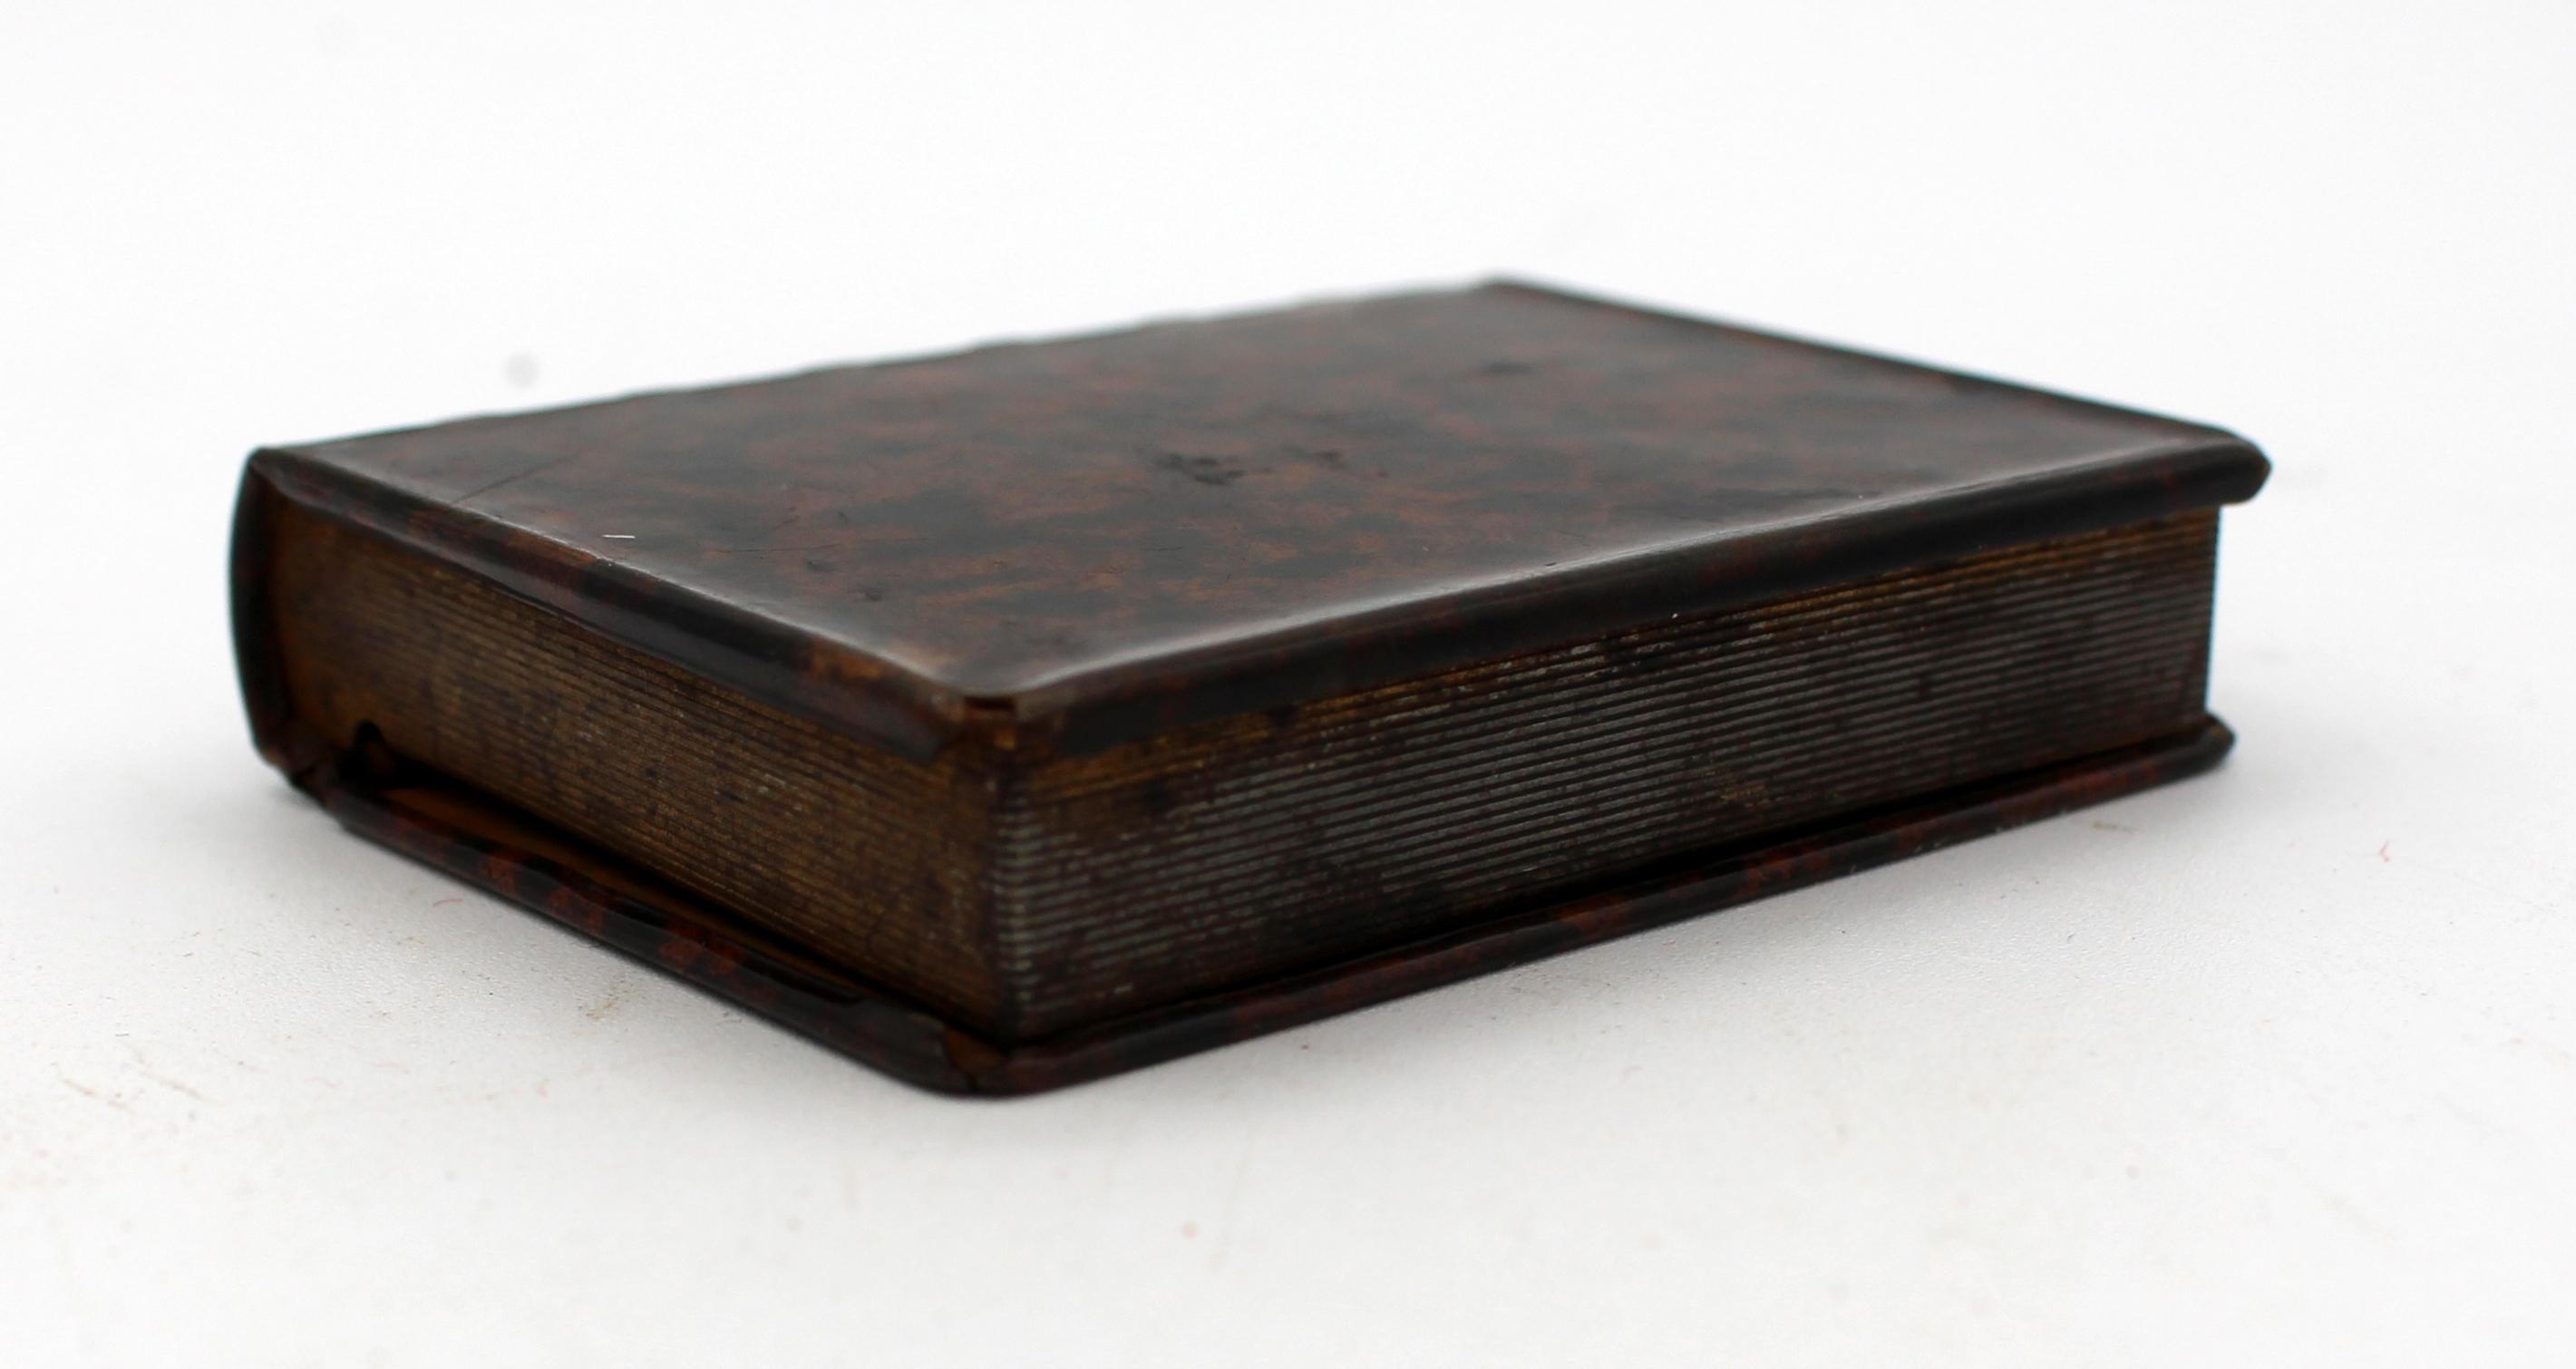 Small faux book box of well painted tole to look like the leather with the tooling work of a fine book with gilt page edges. English, late 19th century.
Measures: 3 1/4